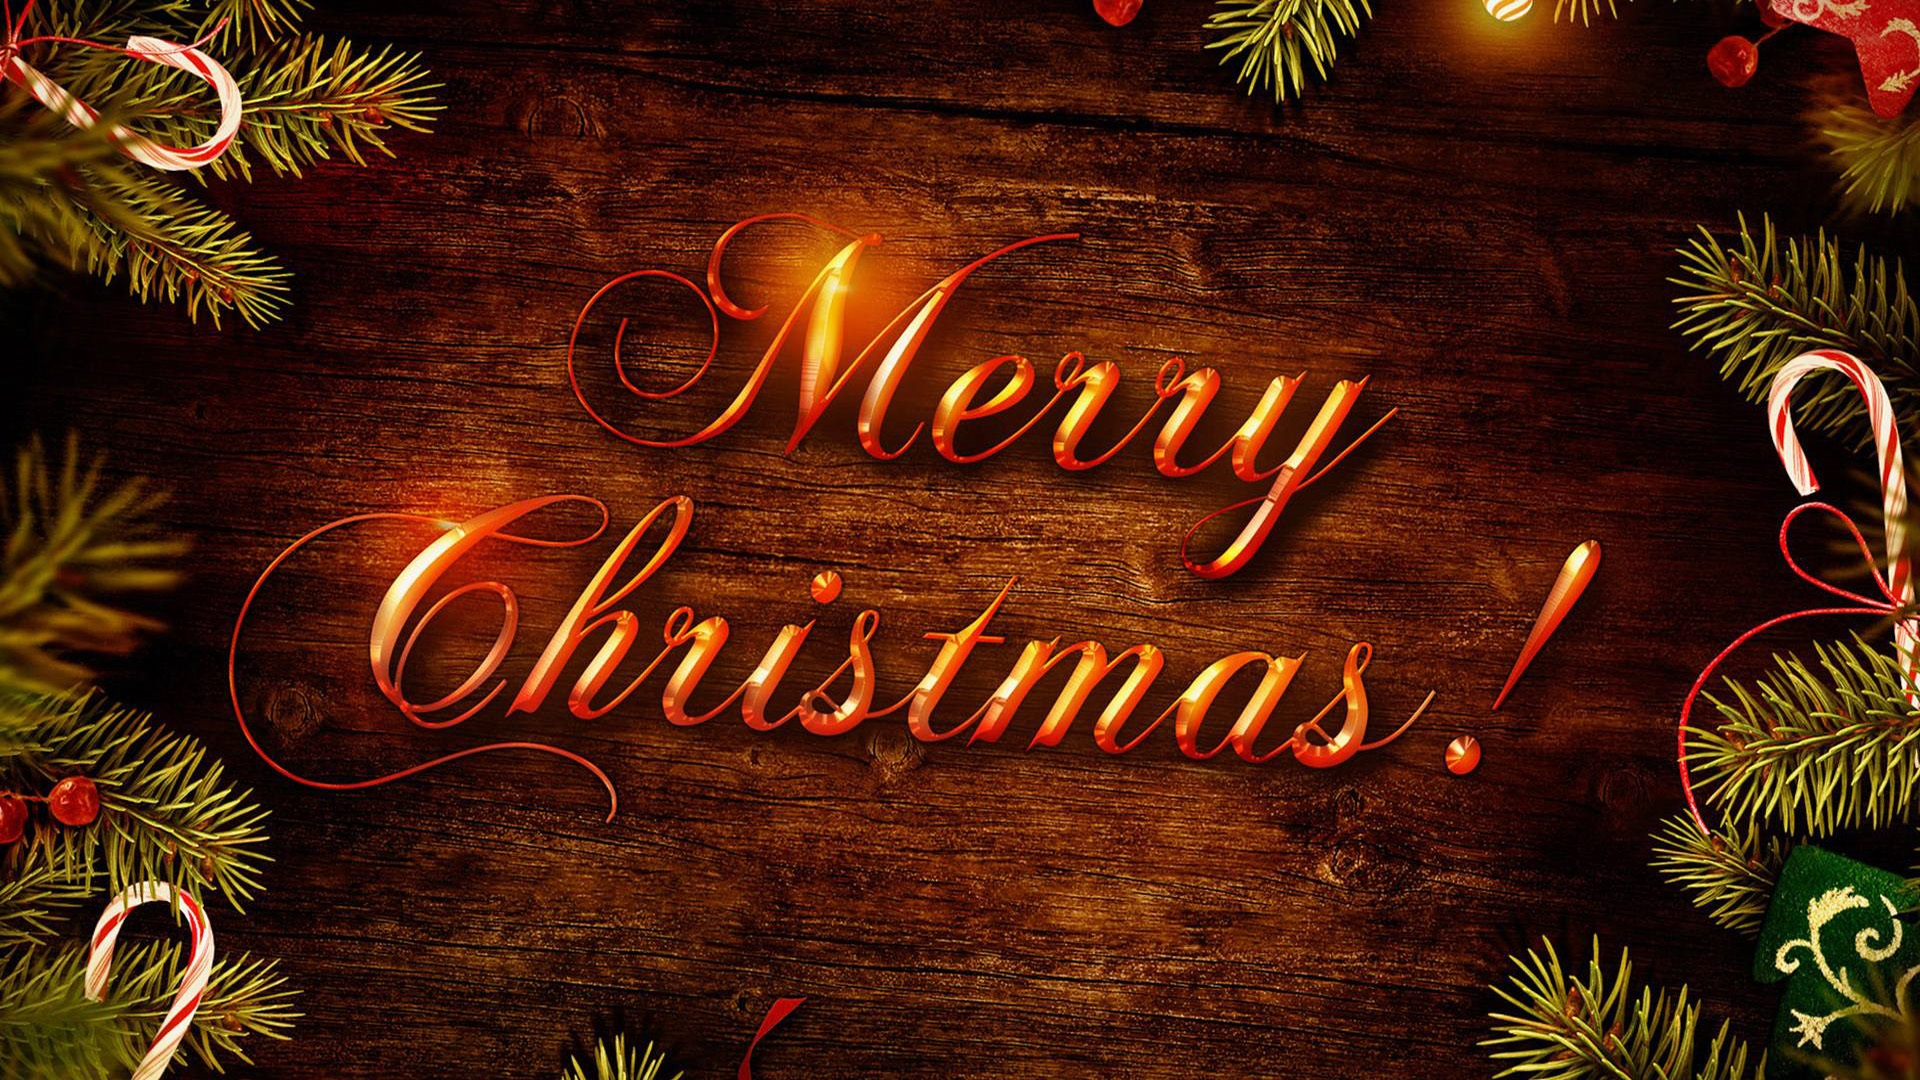 Christmas Day Wallpapers Download-1 - Merry Christmas Wallpaper 3d - HD Wallpaper 